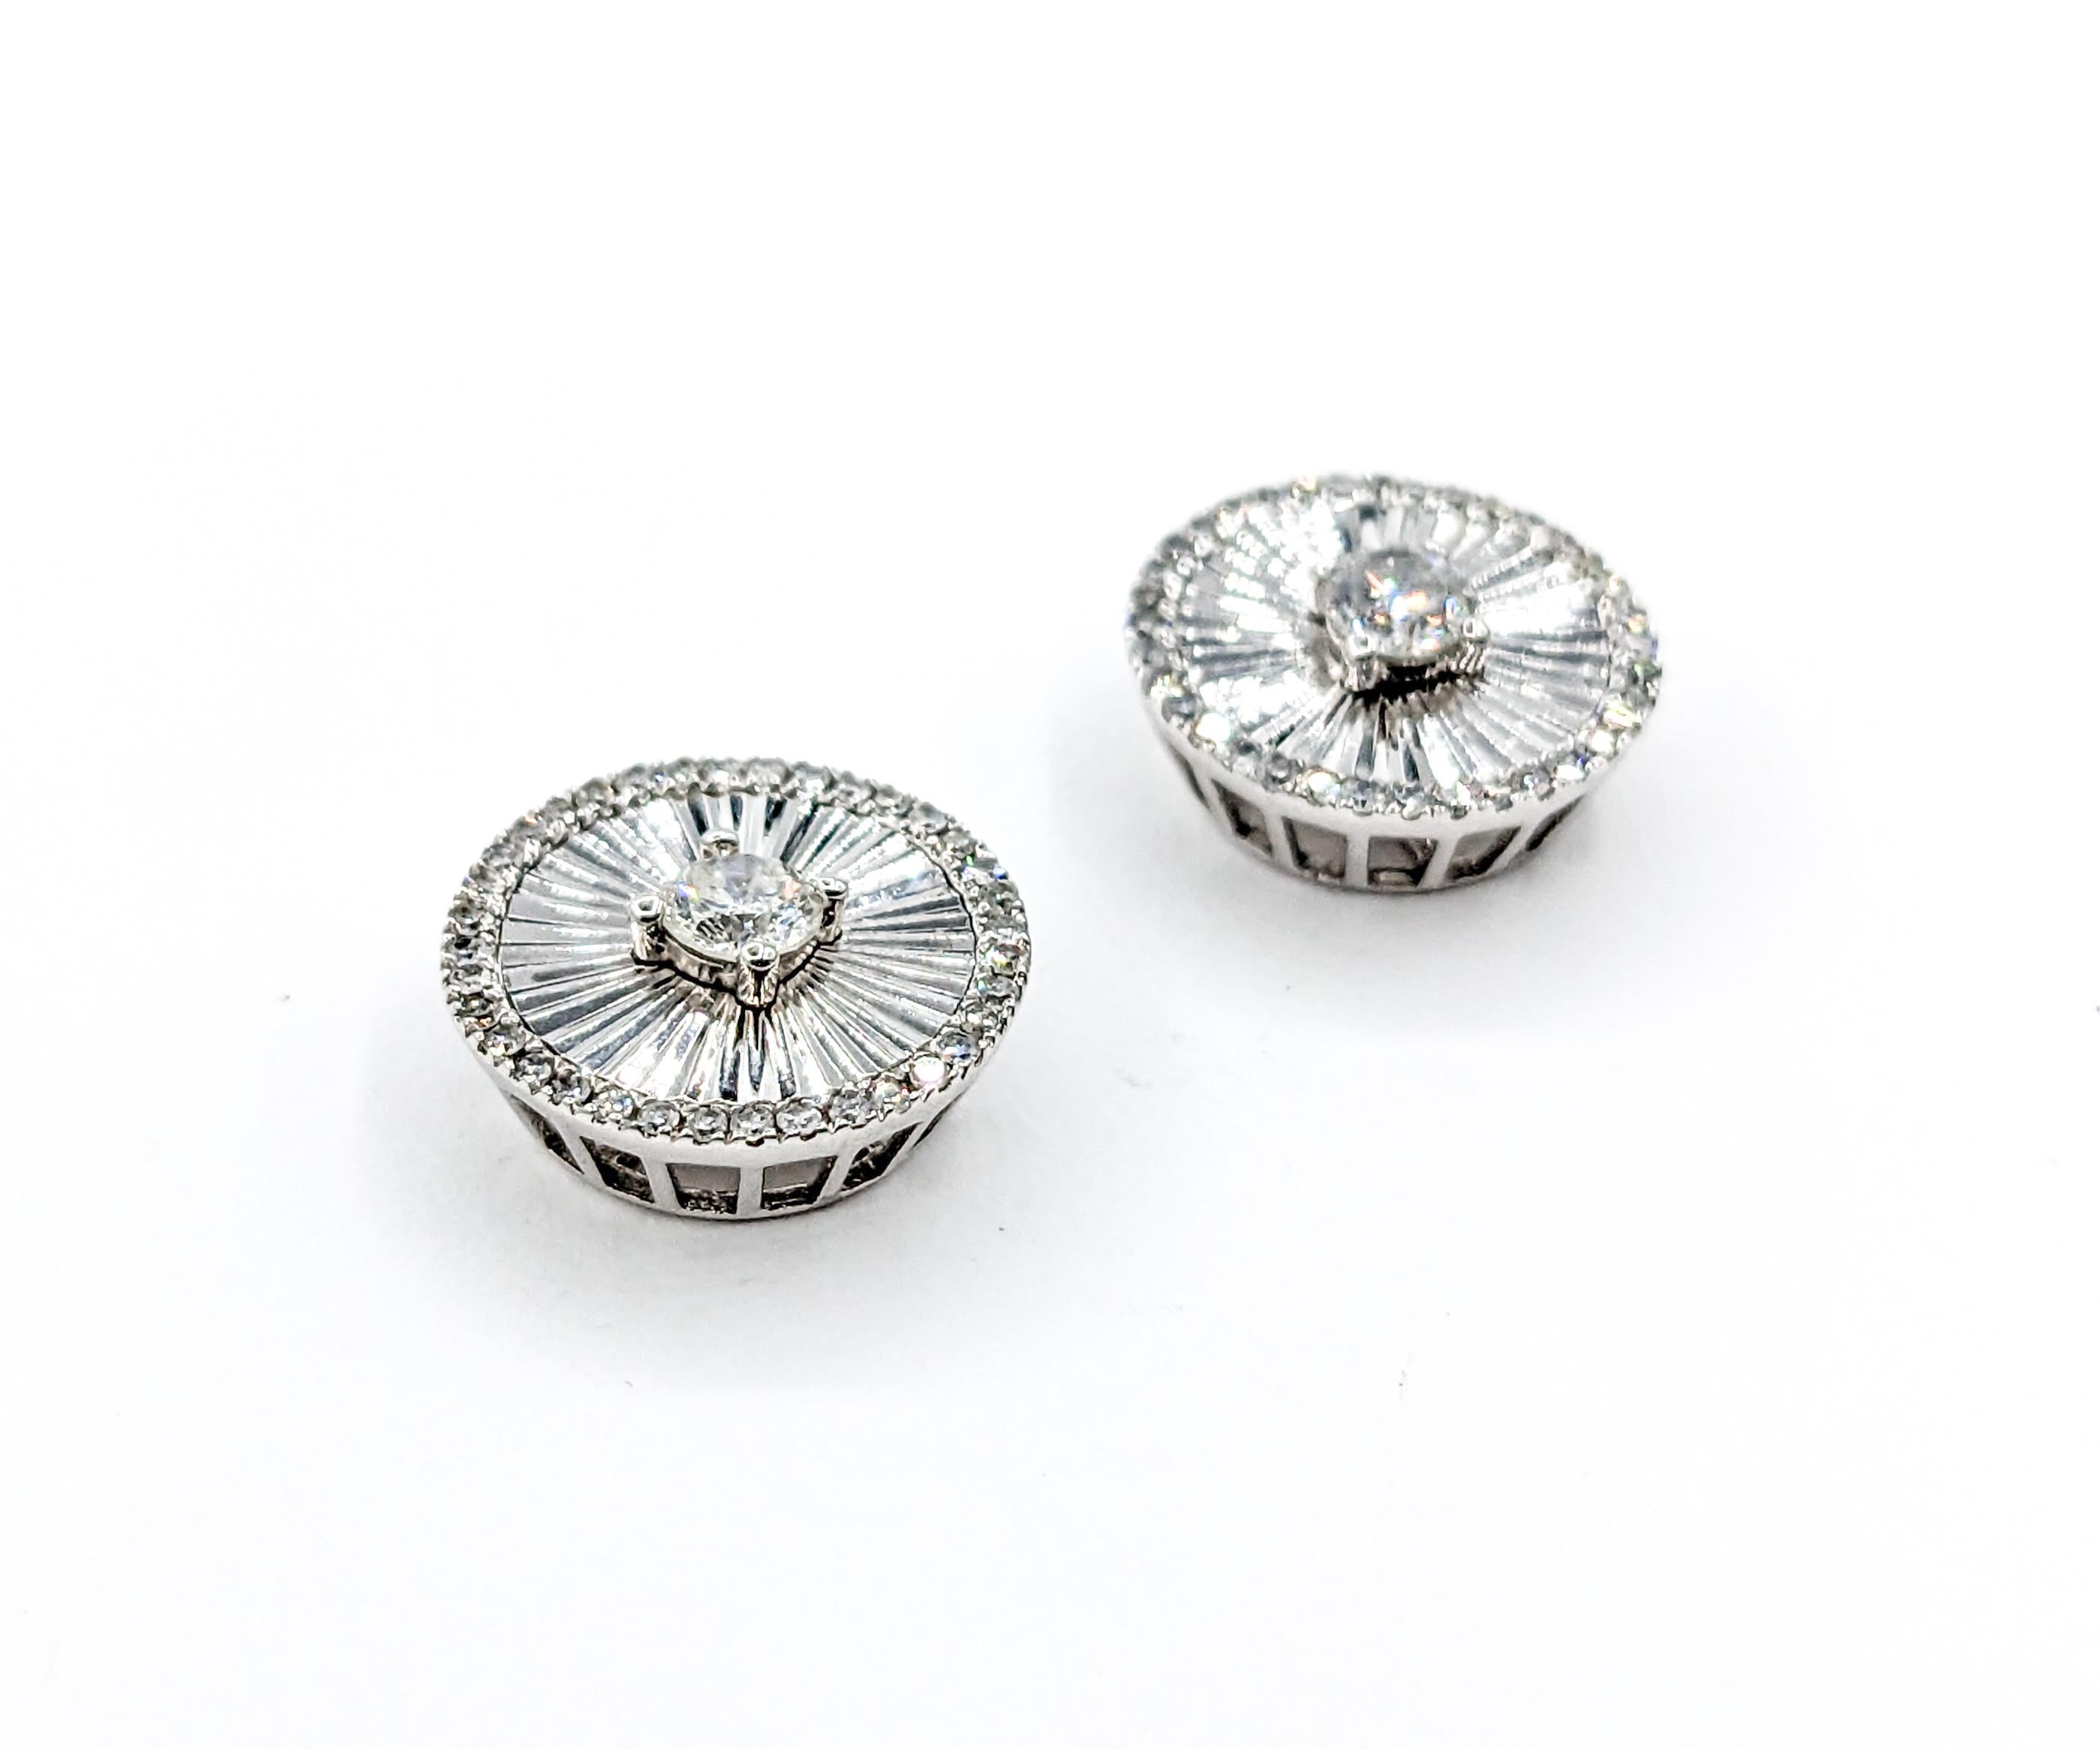 Ornate Disc Diamond Stud Earrings in White Gold

These elegant earrings are finely crafted in 14k white gold, offering a sleek and modern allure. The highlight of these dazzling earrings is the .50ctw of round diamonds, each carefully selected for